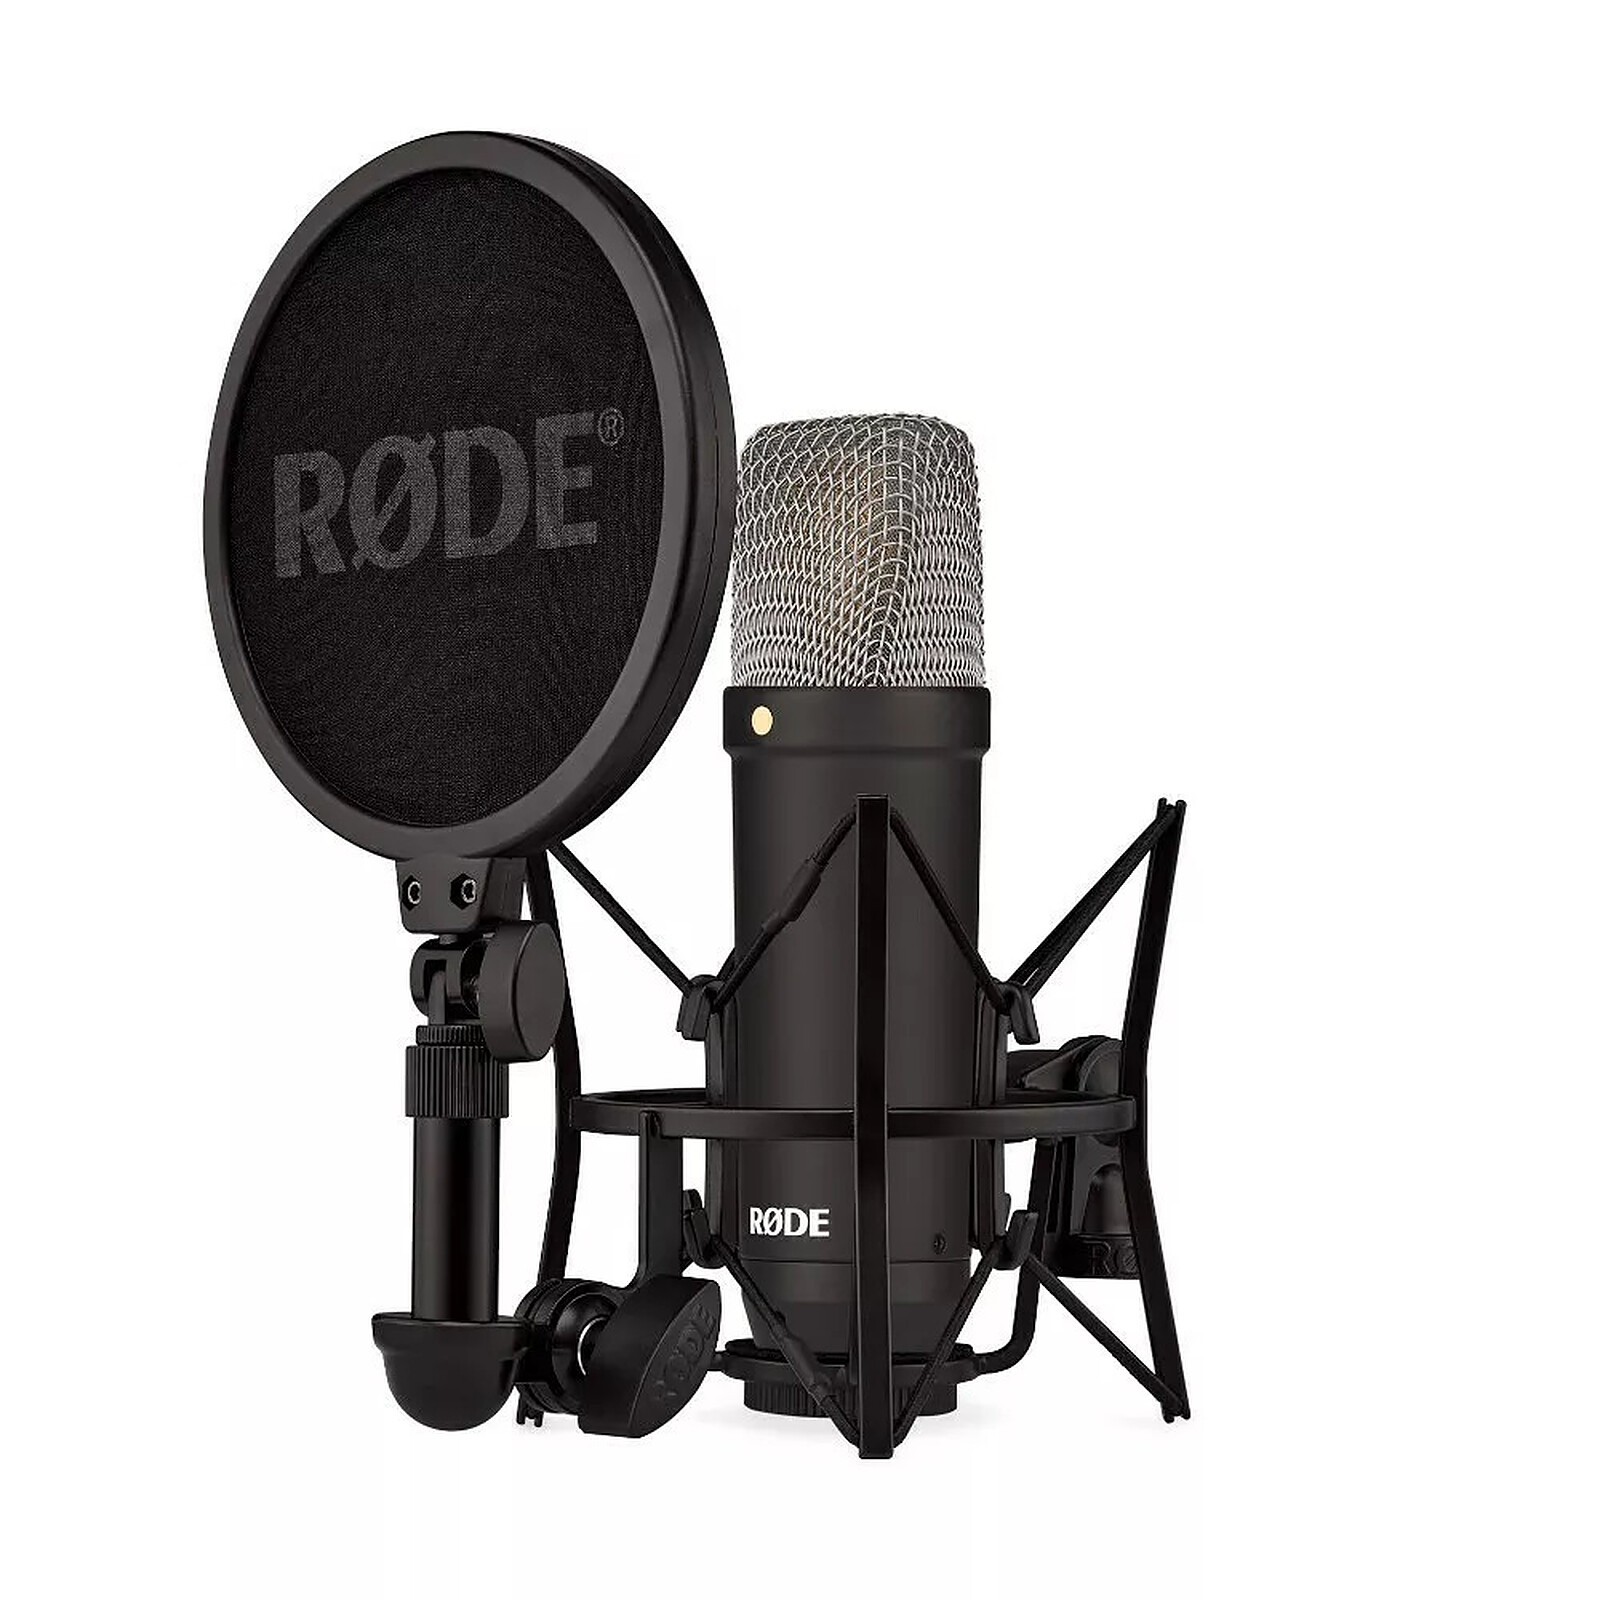 Microphone filaire - MUSE - MC-20B 